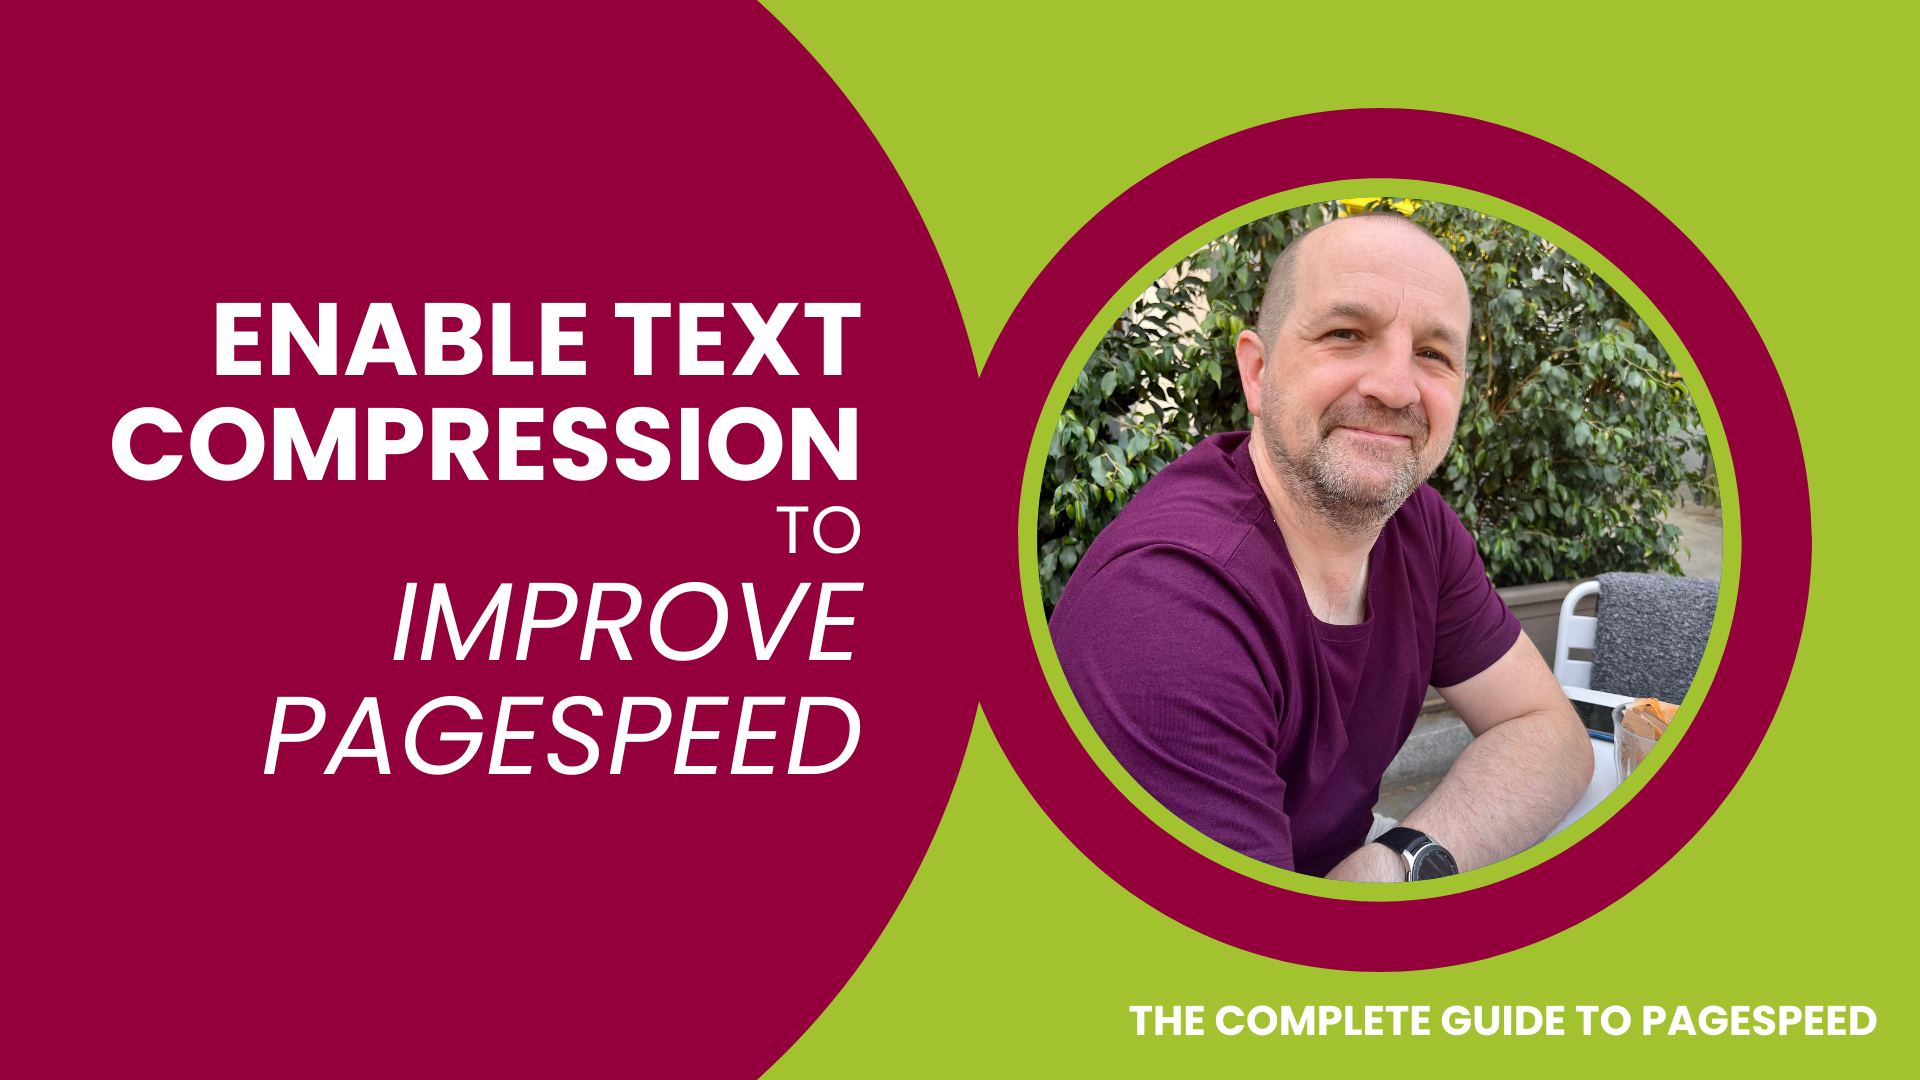 Enable Text Compression to Improve Pagespeed